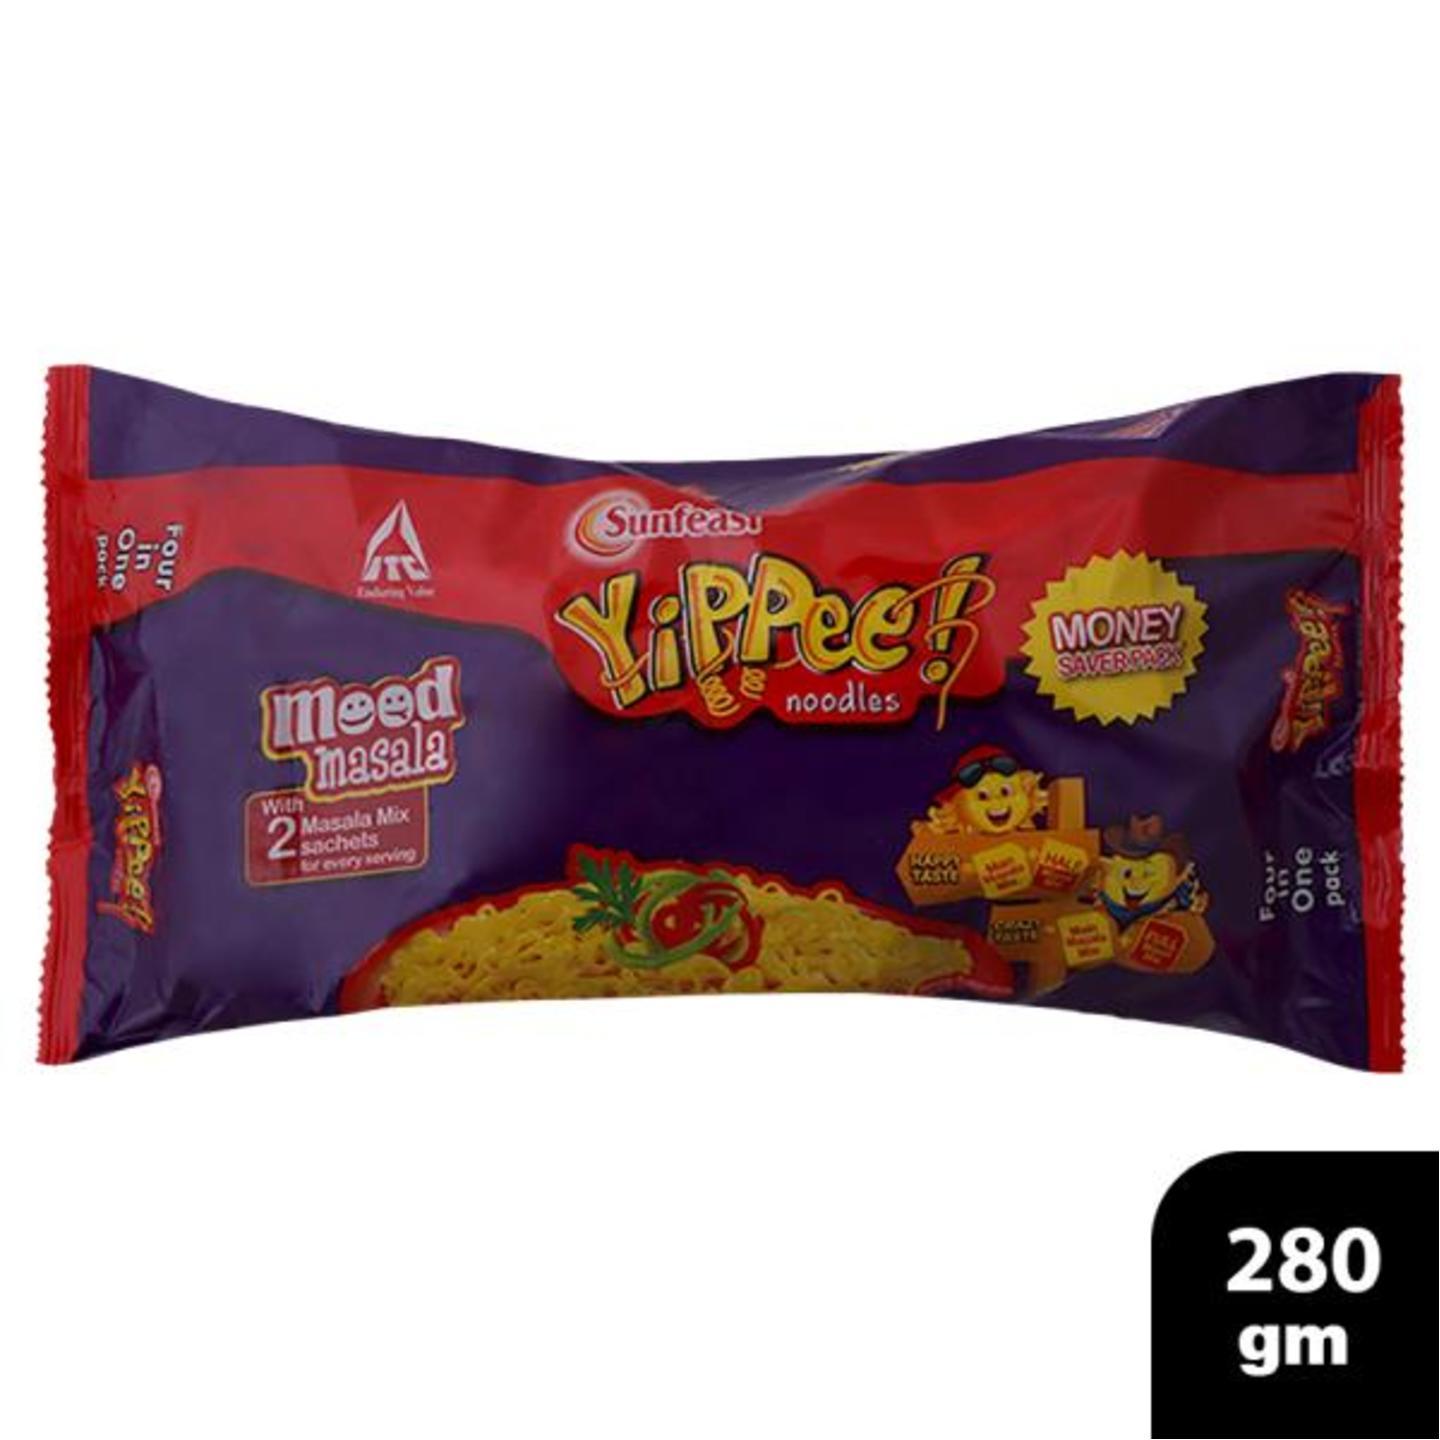 Sunfeast Yippee Mood Masala Instant Noodles 260 g